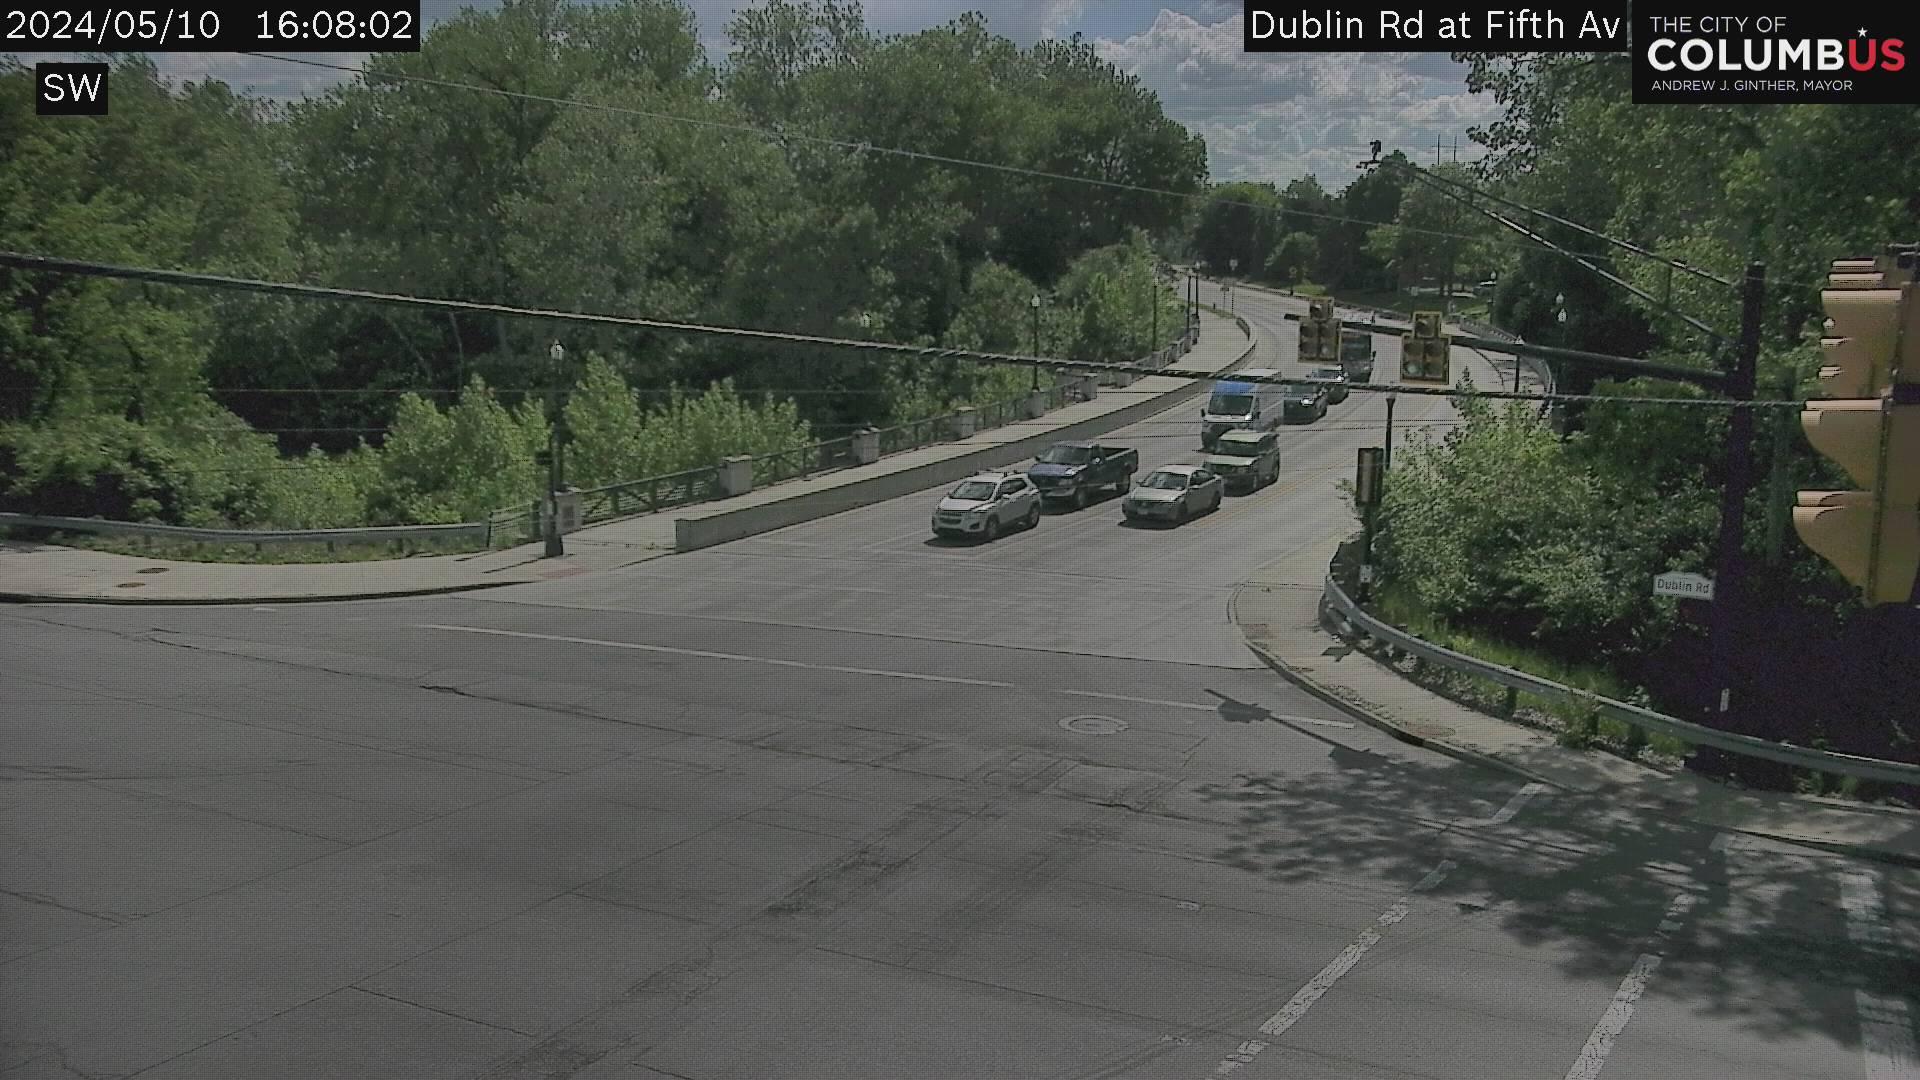 Traffic Cam Marble Cliff: City of Columbus) Dublin Rd at Fifth Ave Player